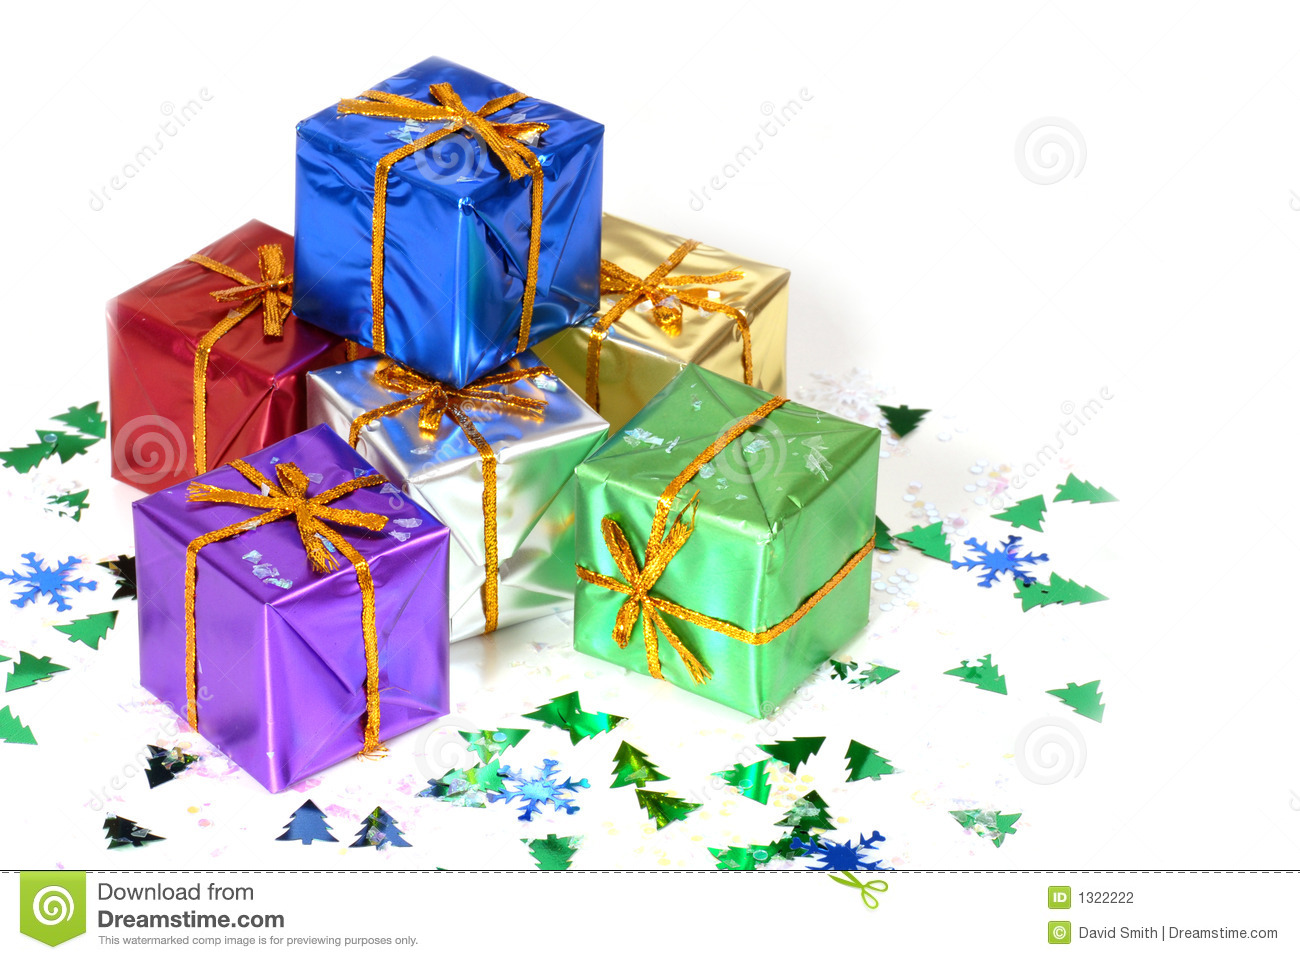 Six Brightly Colored Wrapped Christmas Presents With Holiday Confetti